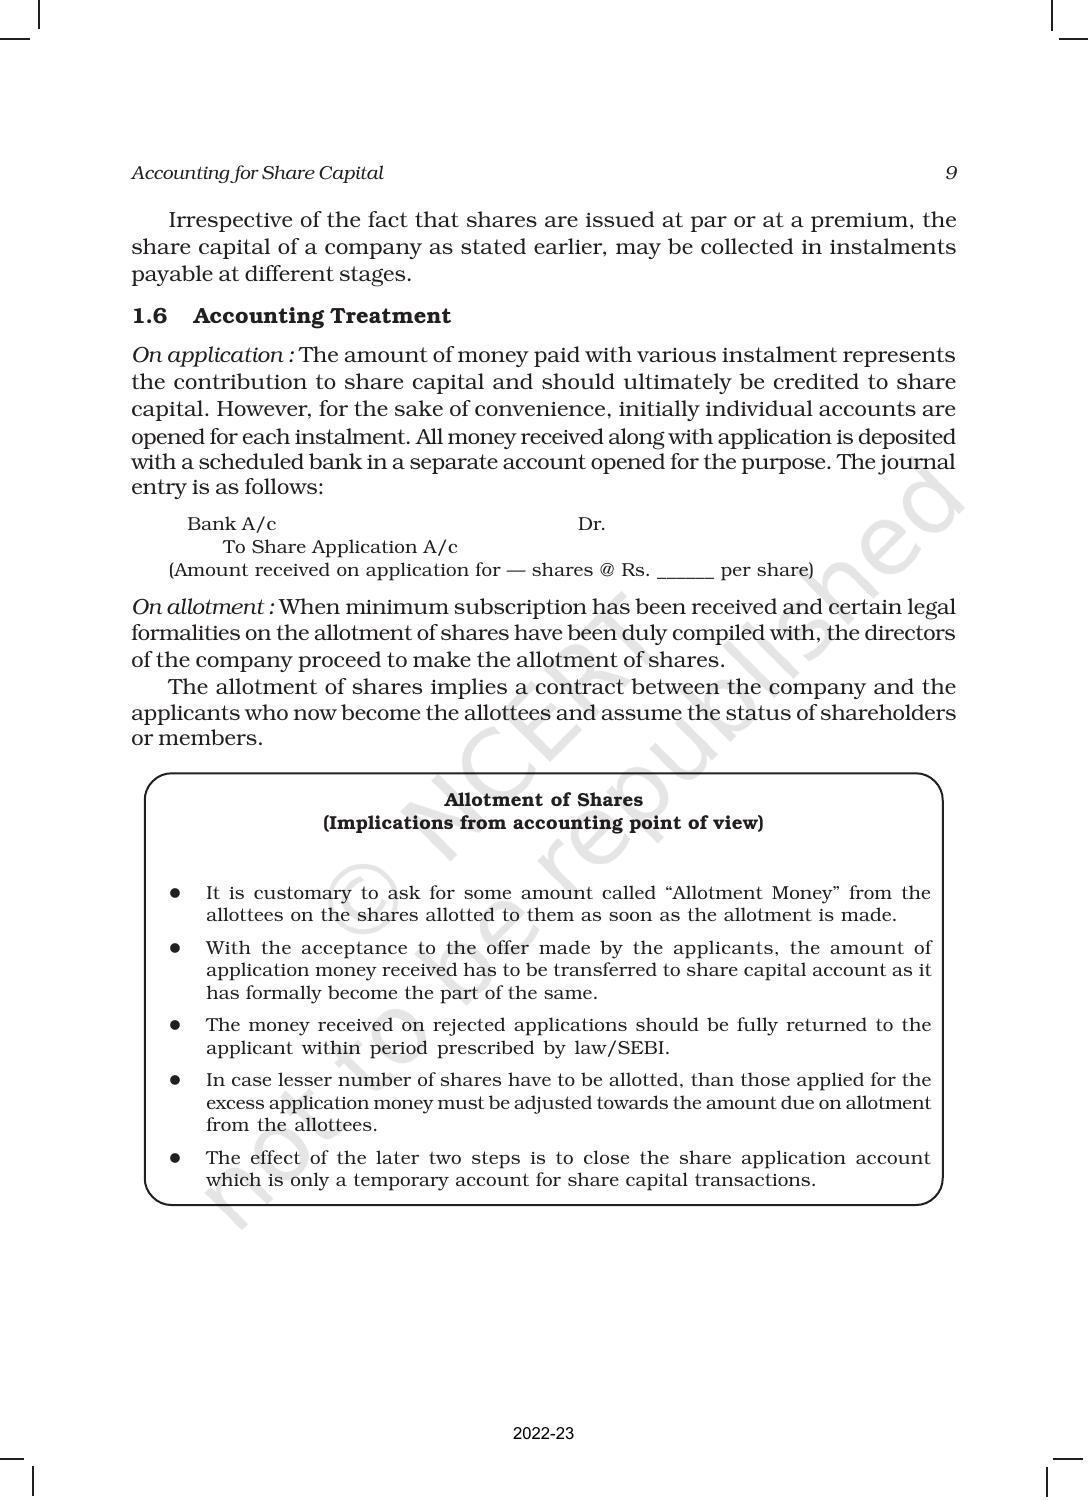 NCERT Book for Class 12 Accountancy Part II Chapter 1 Accounting for Share Capital - Page 9